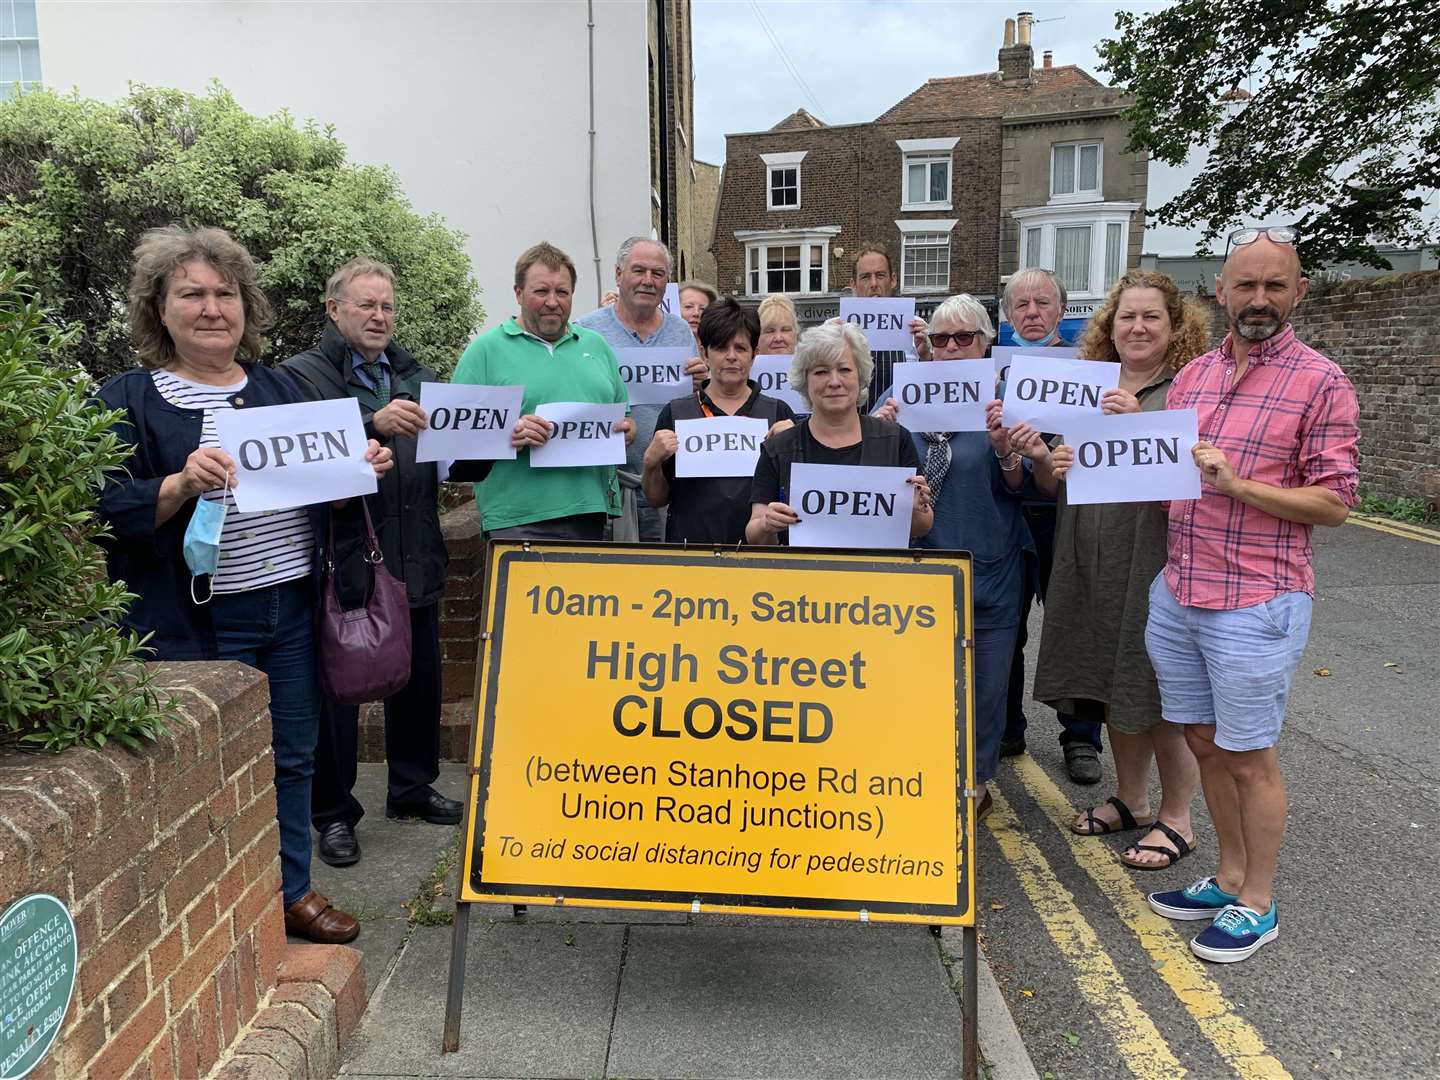 Business owners in the High Street are campaigning against the council's decision to close the High Street to cars from 10am until 2pm on Saturdays